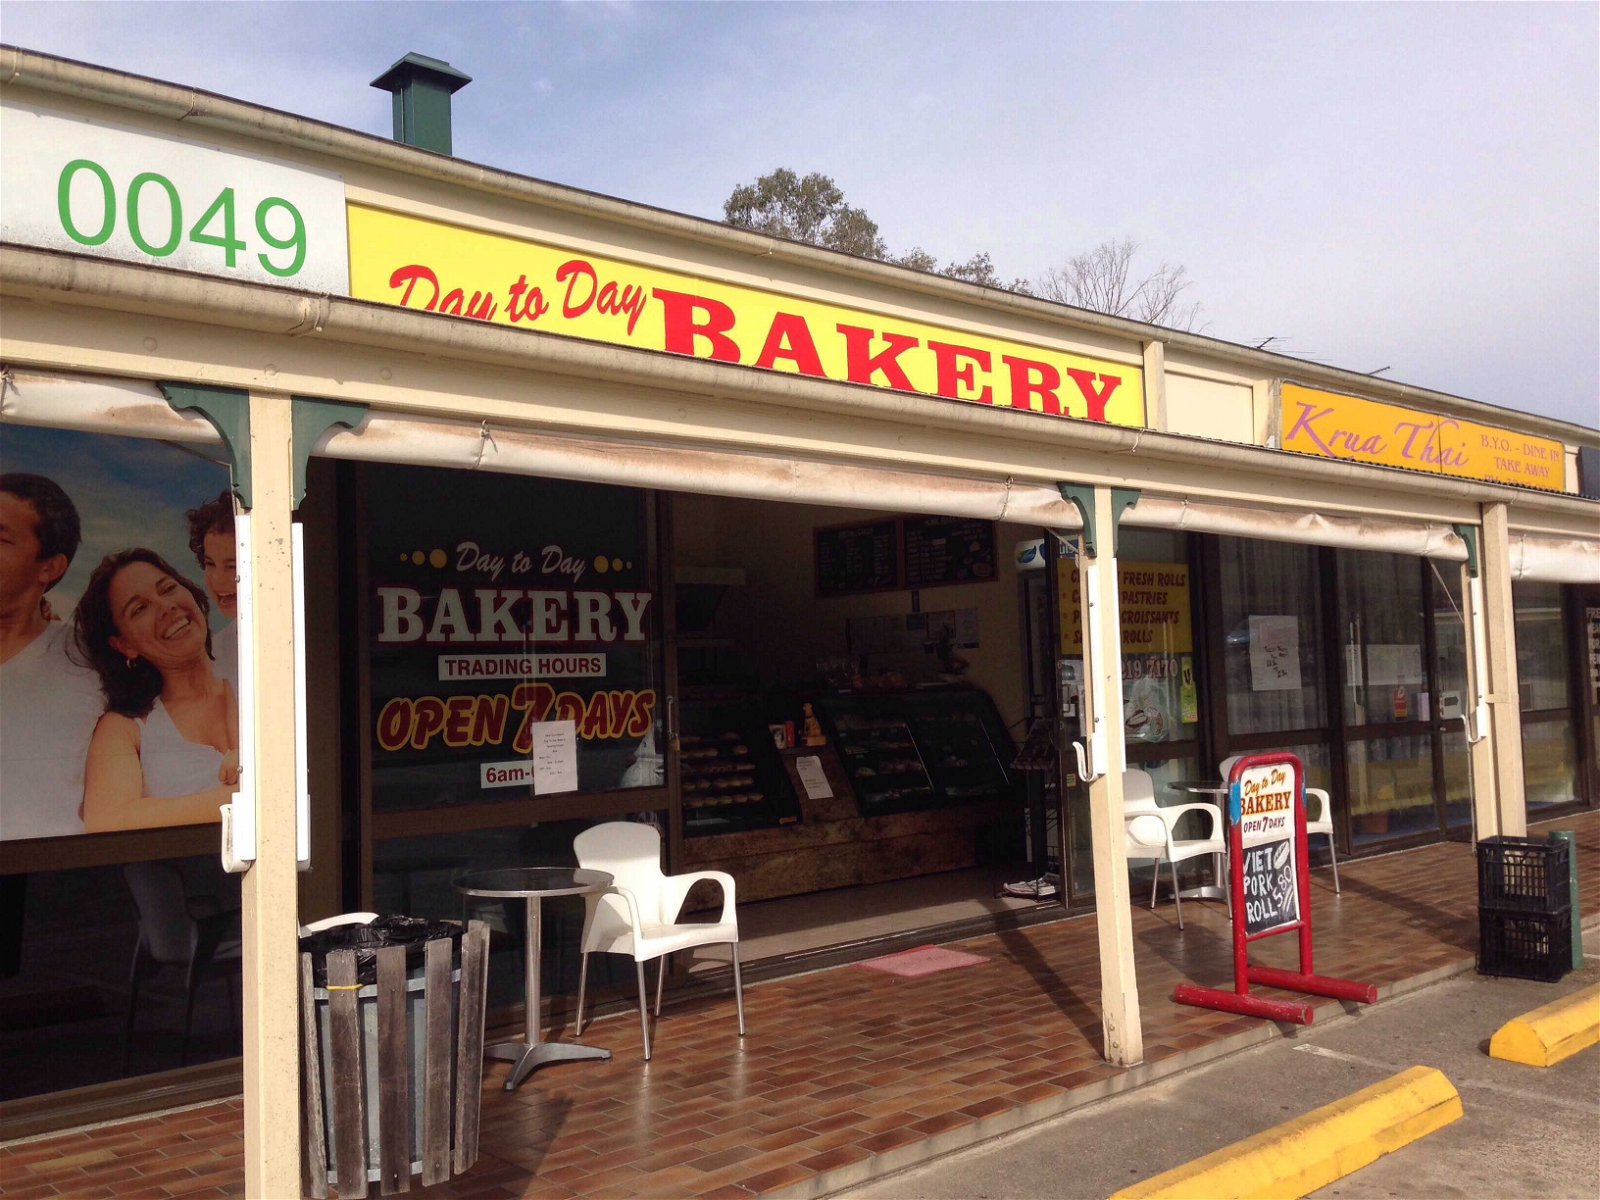 Day To Day Bakery